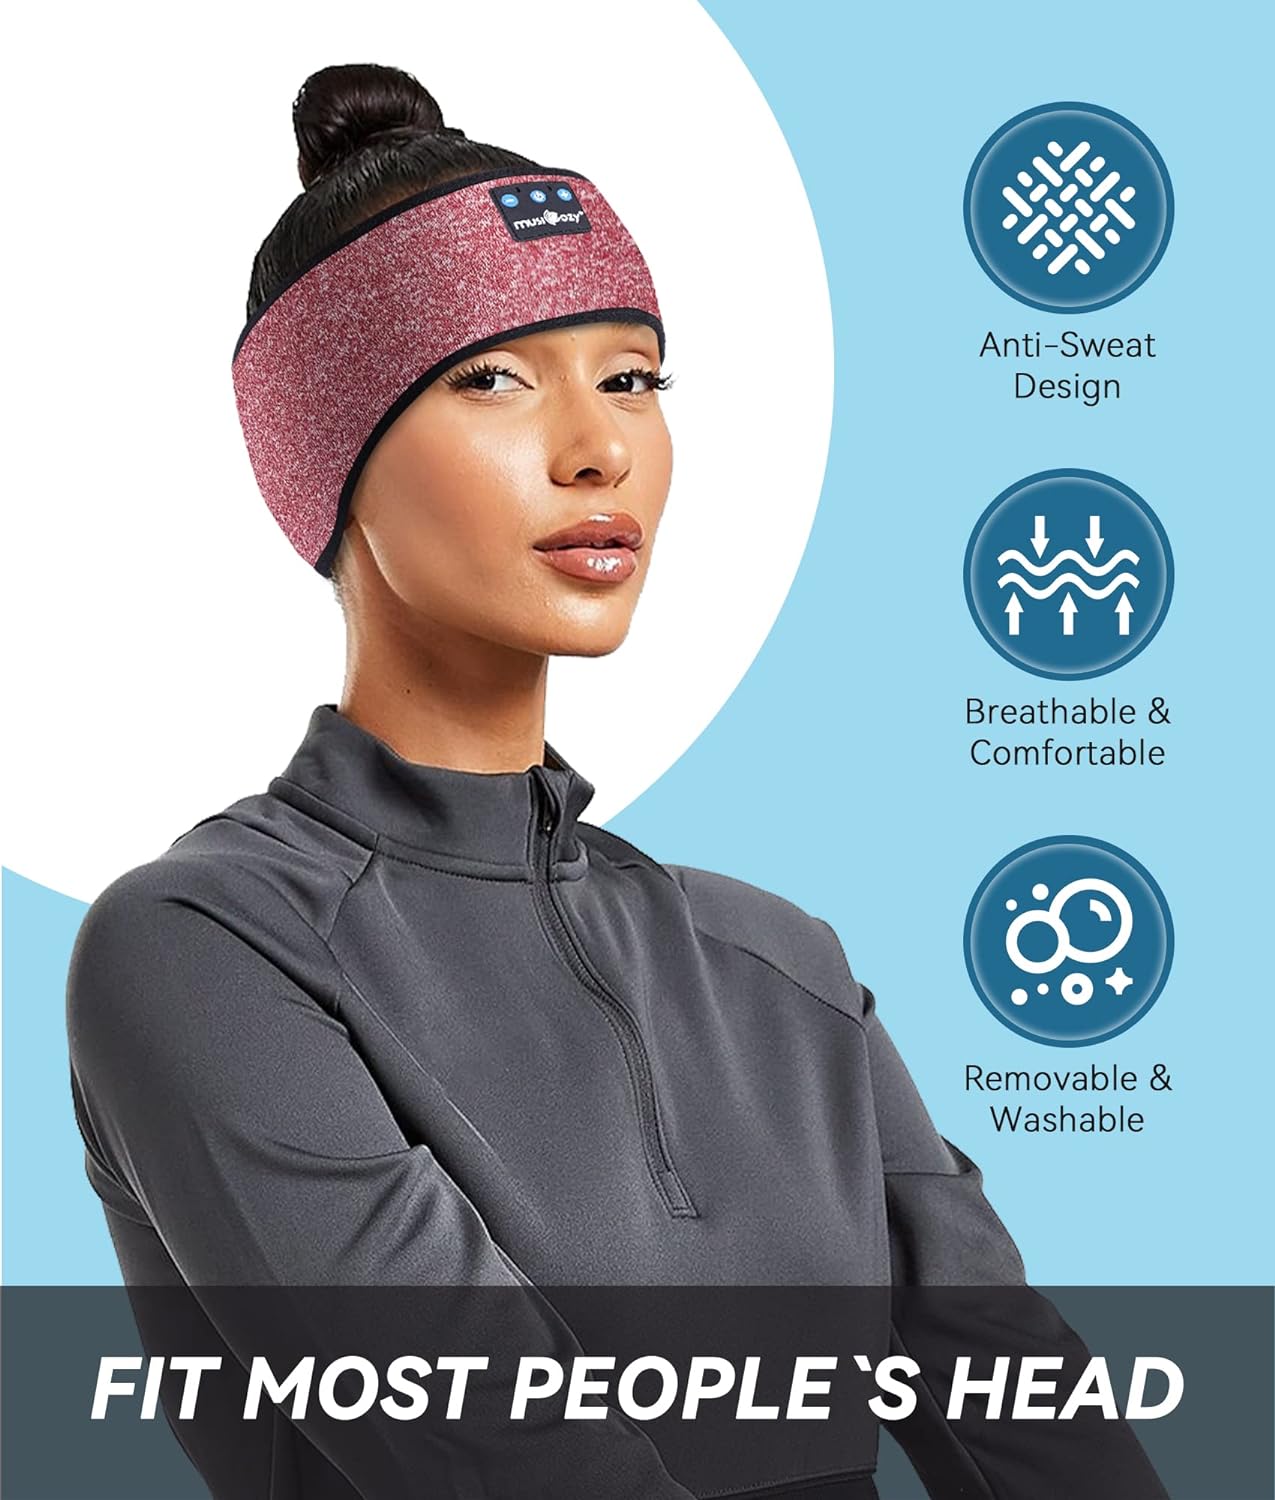 Musicozy Sleep Headphones Bluetooth 5.2 Headband, Sports Wireless Earphones Sweat Resistant Earbuds With Ultra-Thin Hd Stereo Speaker For Workout Running Cool Gadgets Unique Gifts